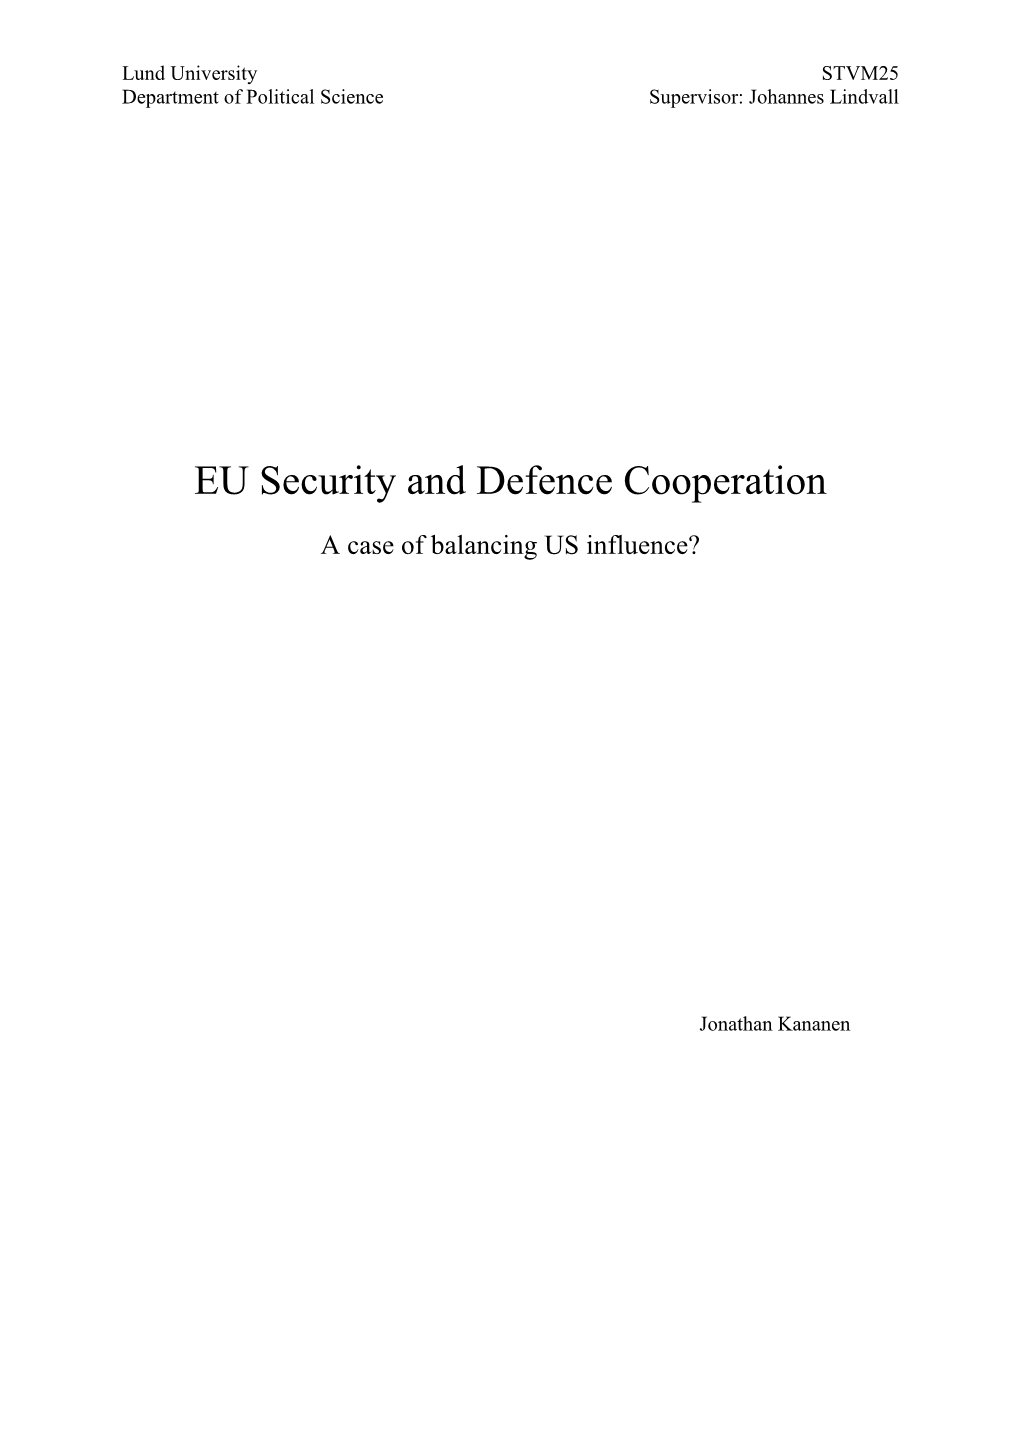 EU Security and Defence Cooperation